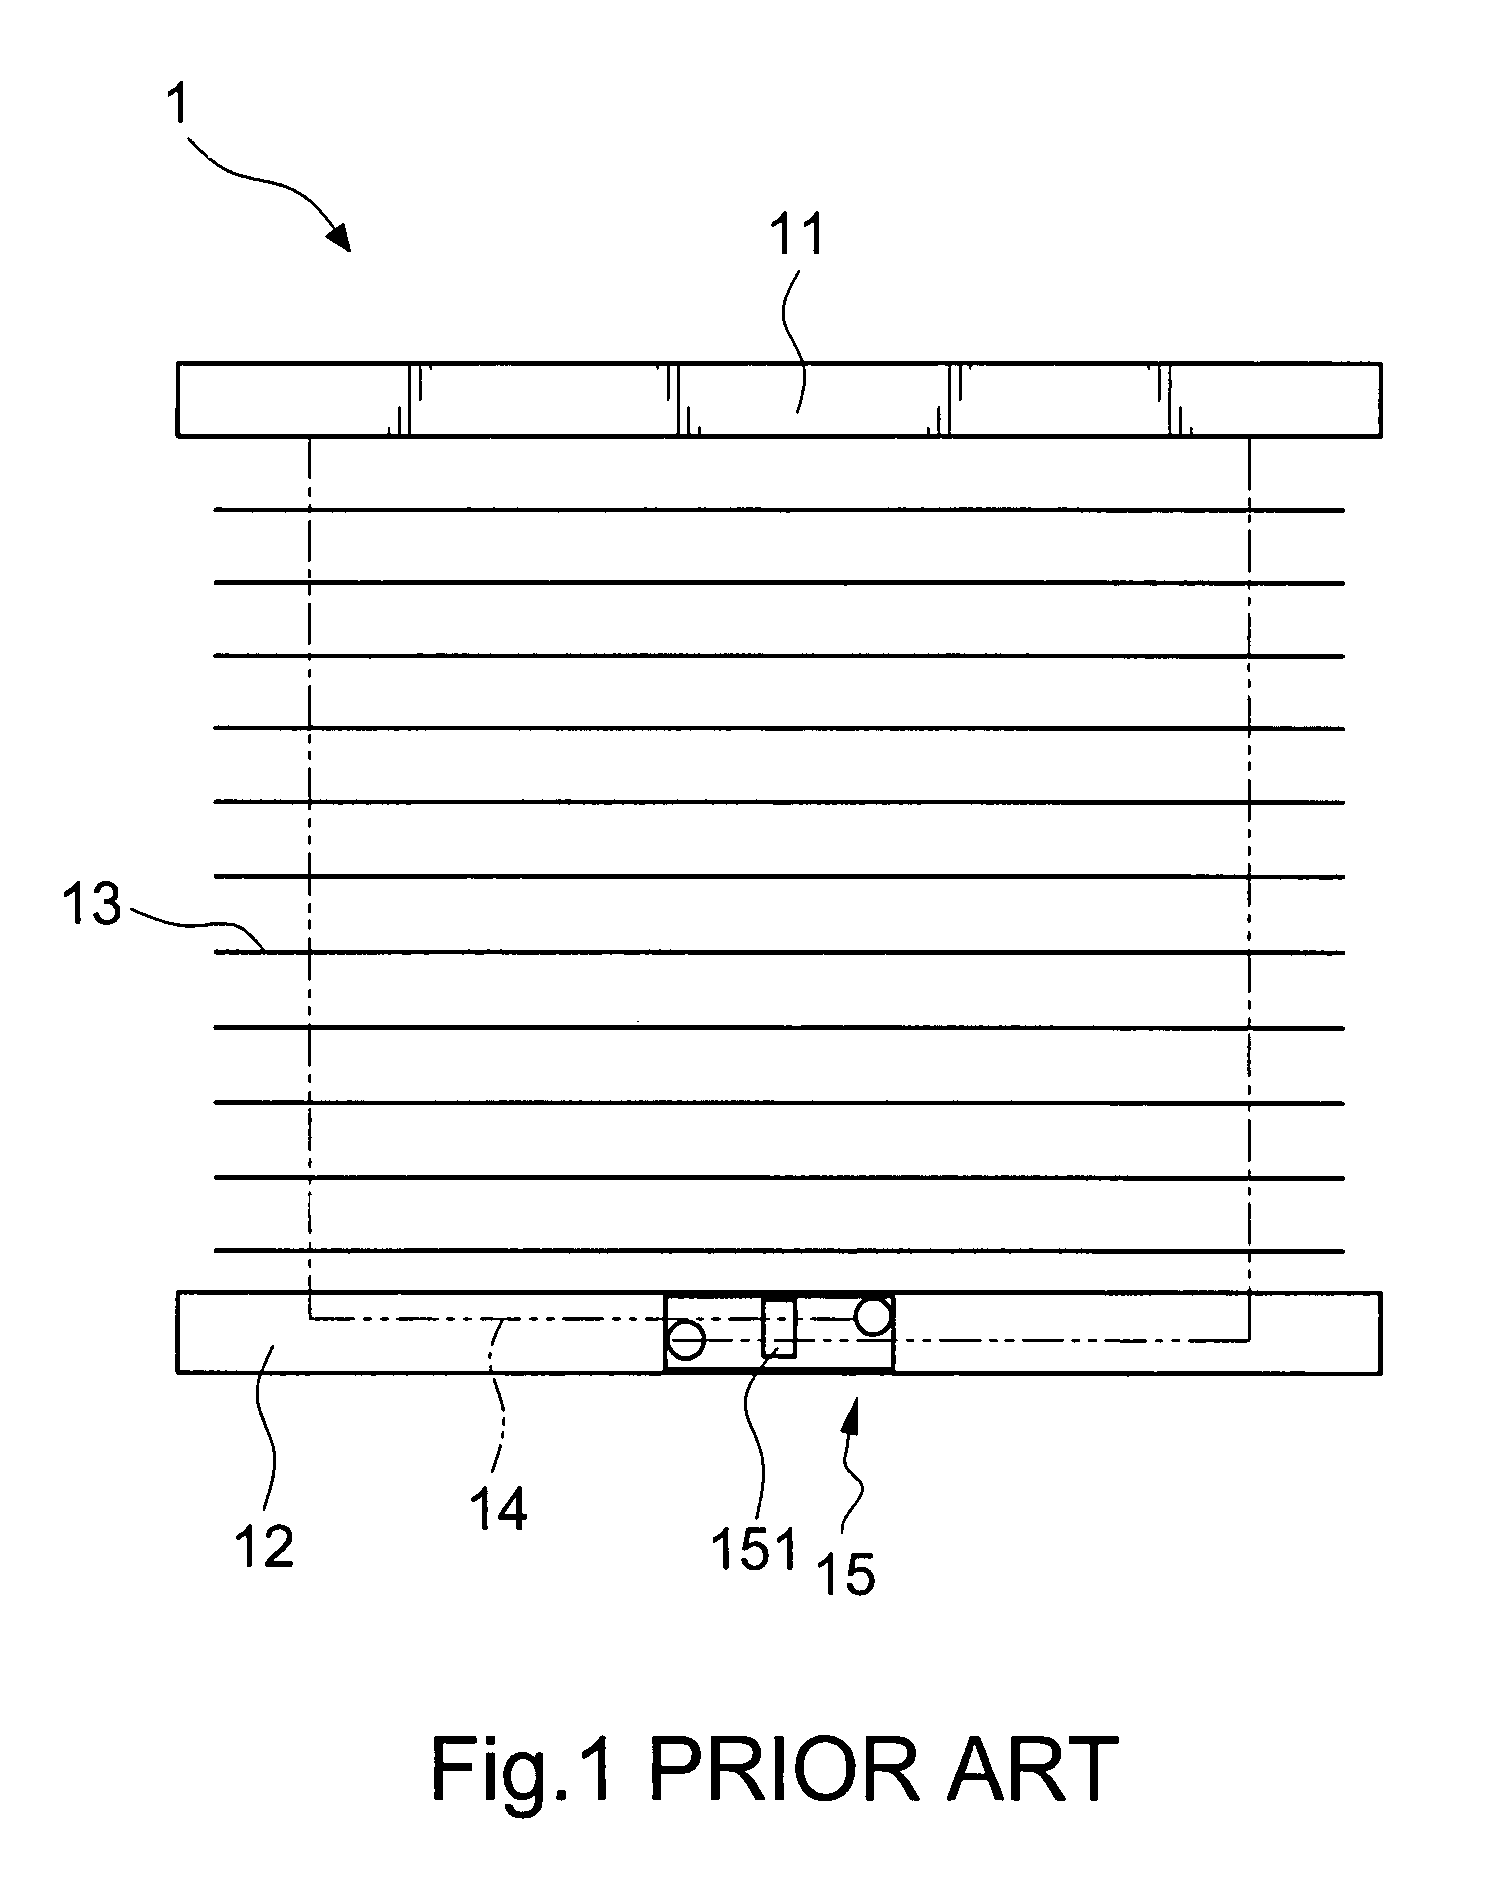 Lifting control apparatus for window covering